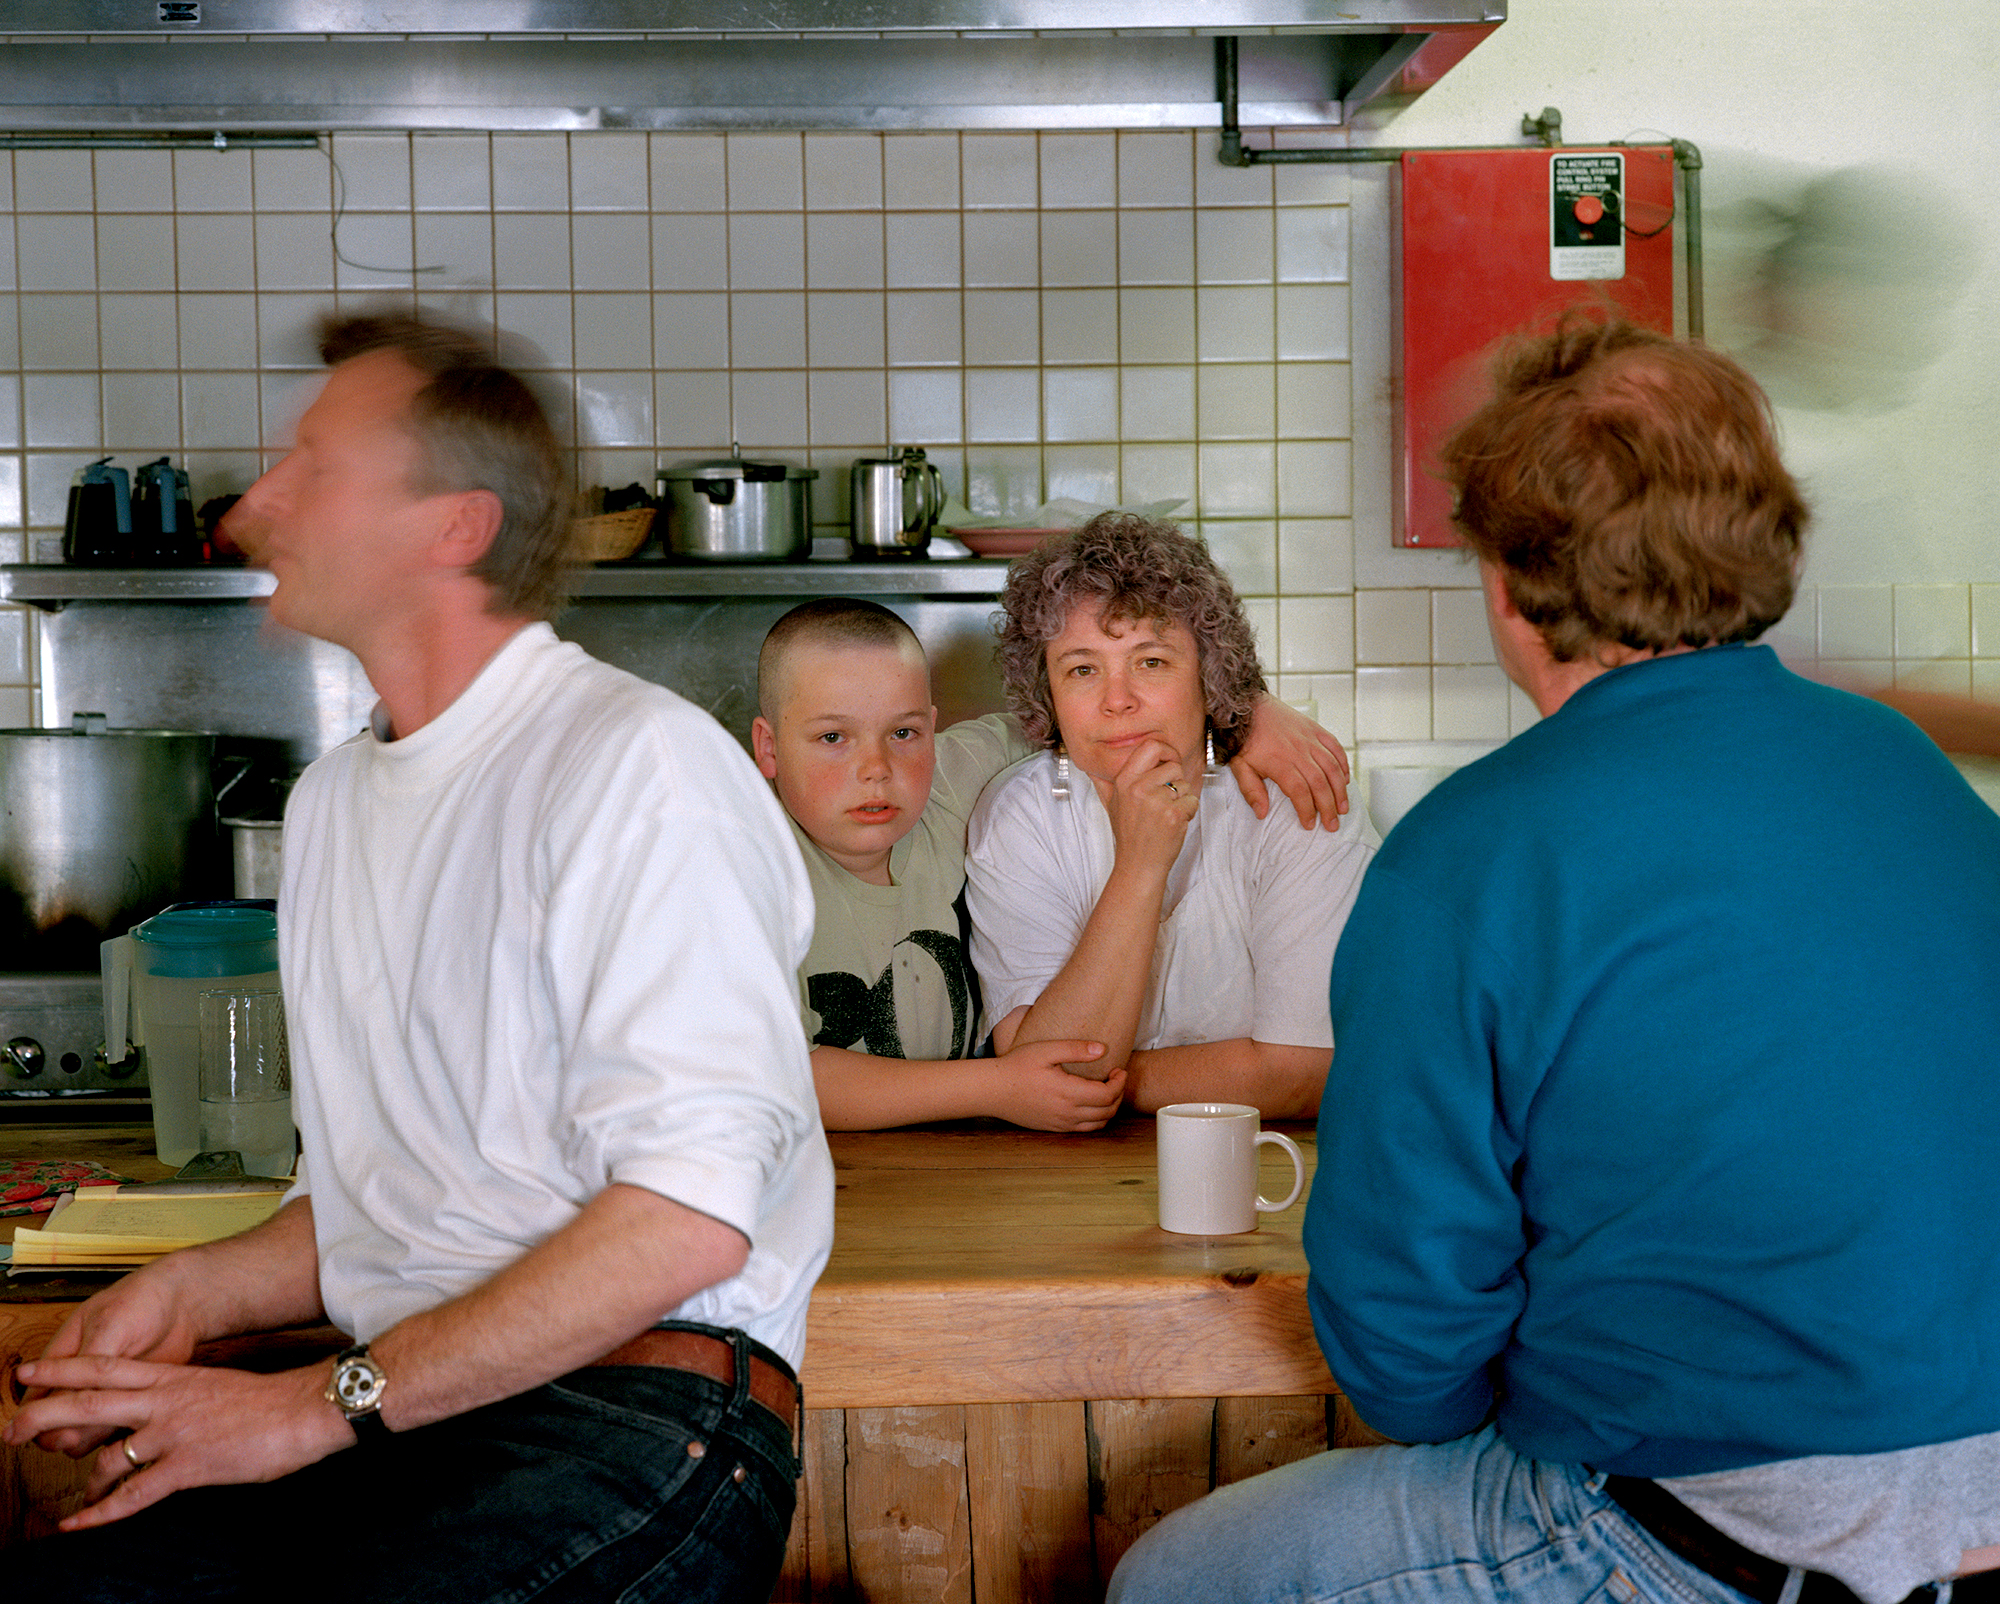   Mother/son at her diner, New Mexico, from Politics, 1995  